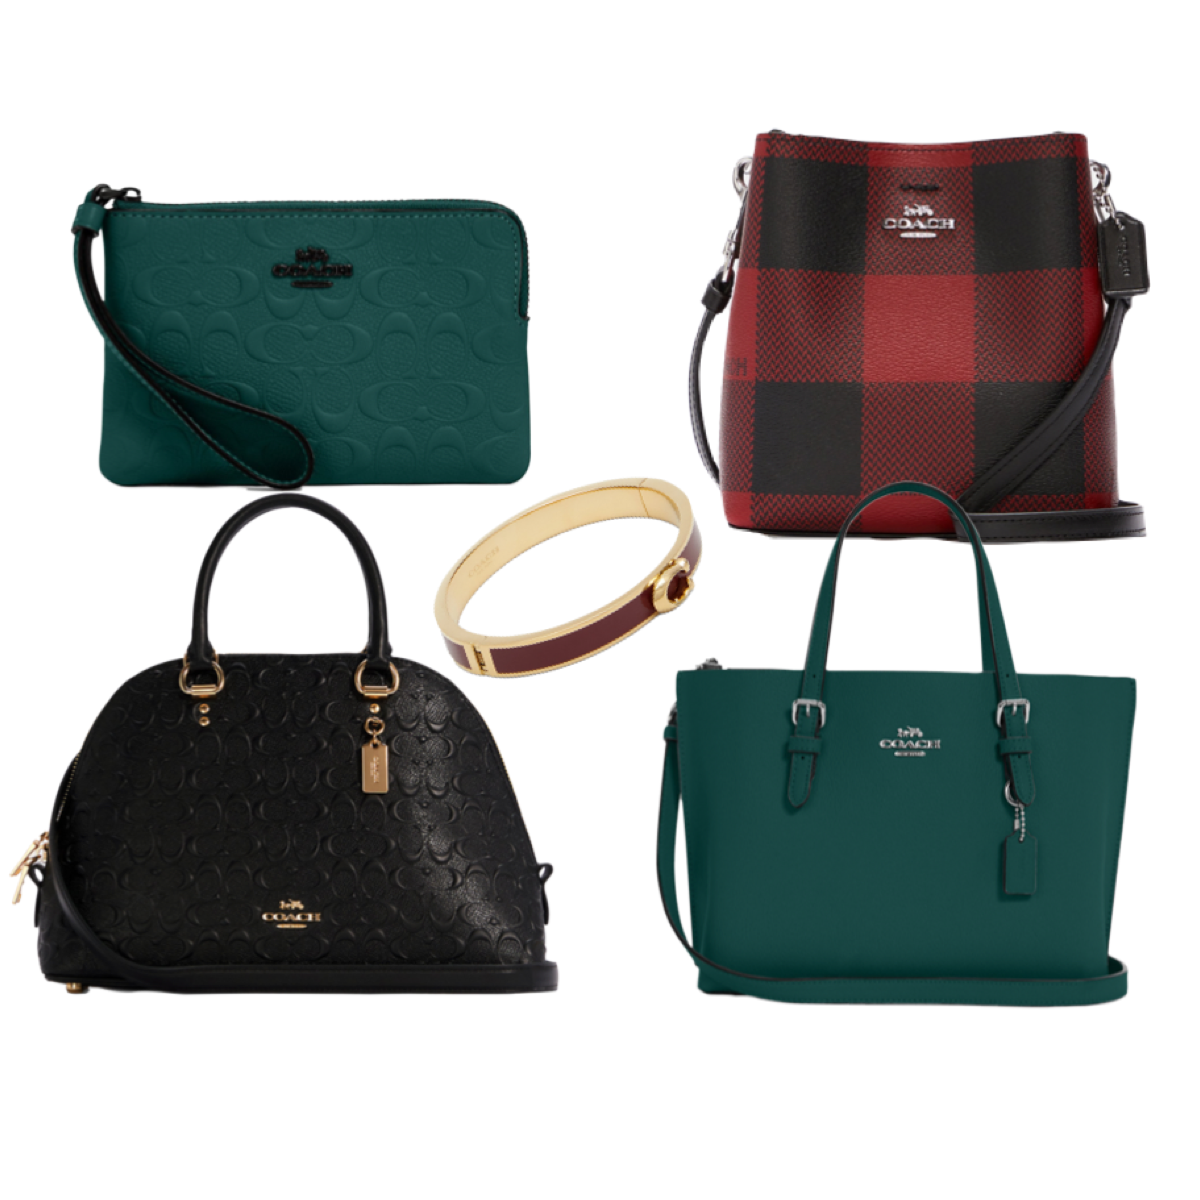 Take 25% Off Select Styles During Coach's Early Black Friday Sale